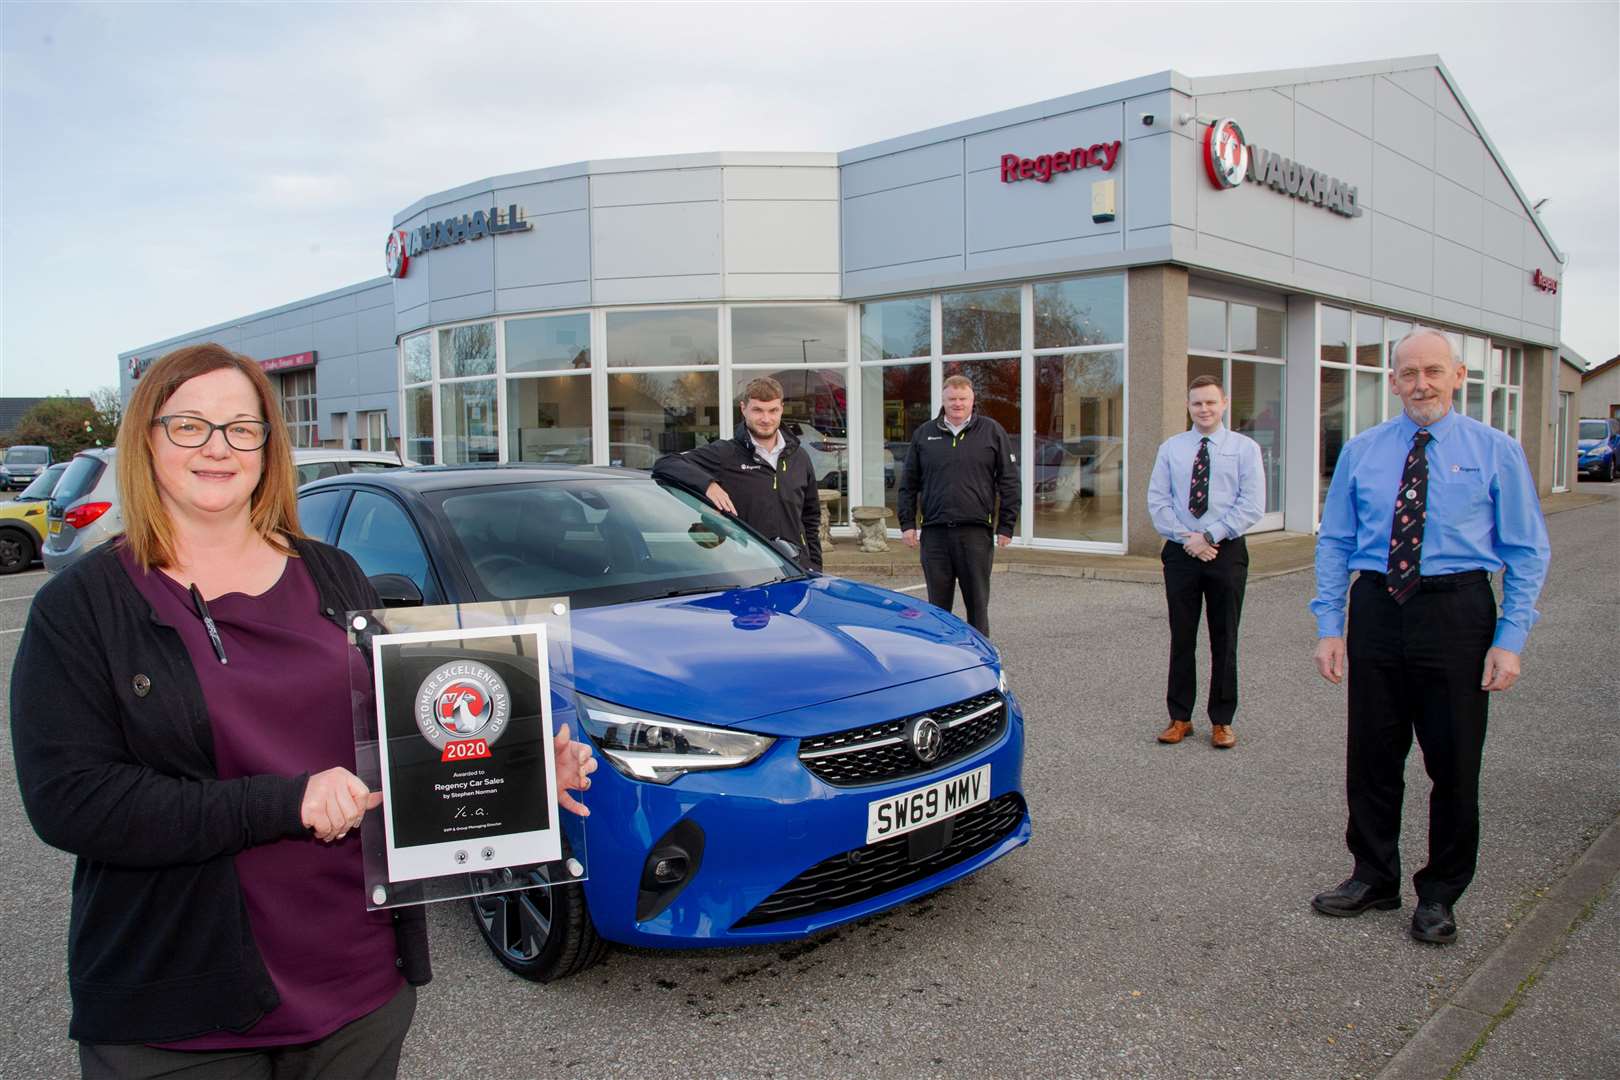 Celebrating scooping Vauxhall's UK Customer Excellence Award are Regency Car Sales team members (from left) Awlwyn Mair, Shawn Milne, Bryan Slater, Robert Campbell and Ian Legge. Picture: Daniel Forsyth